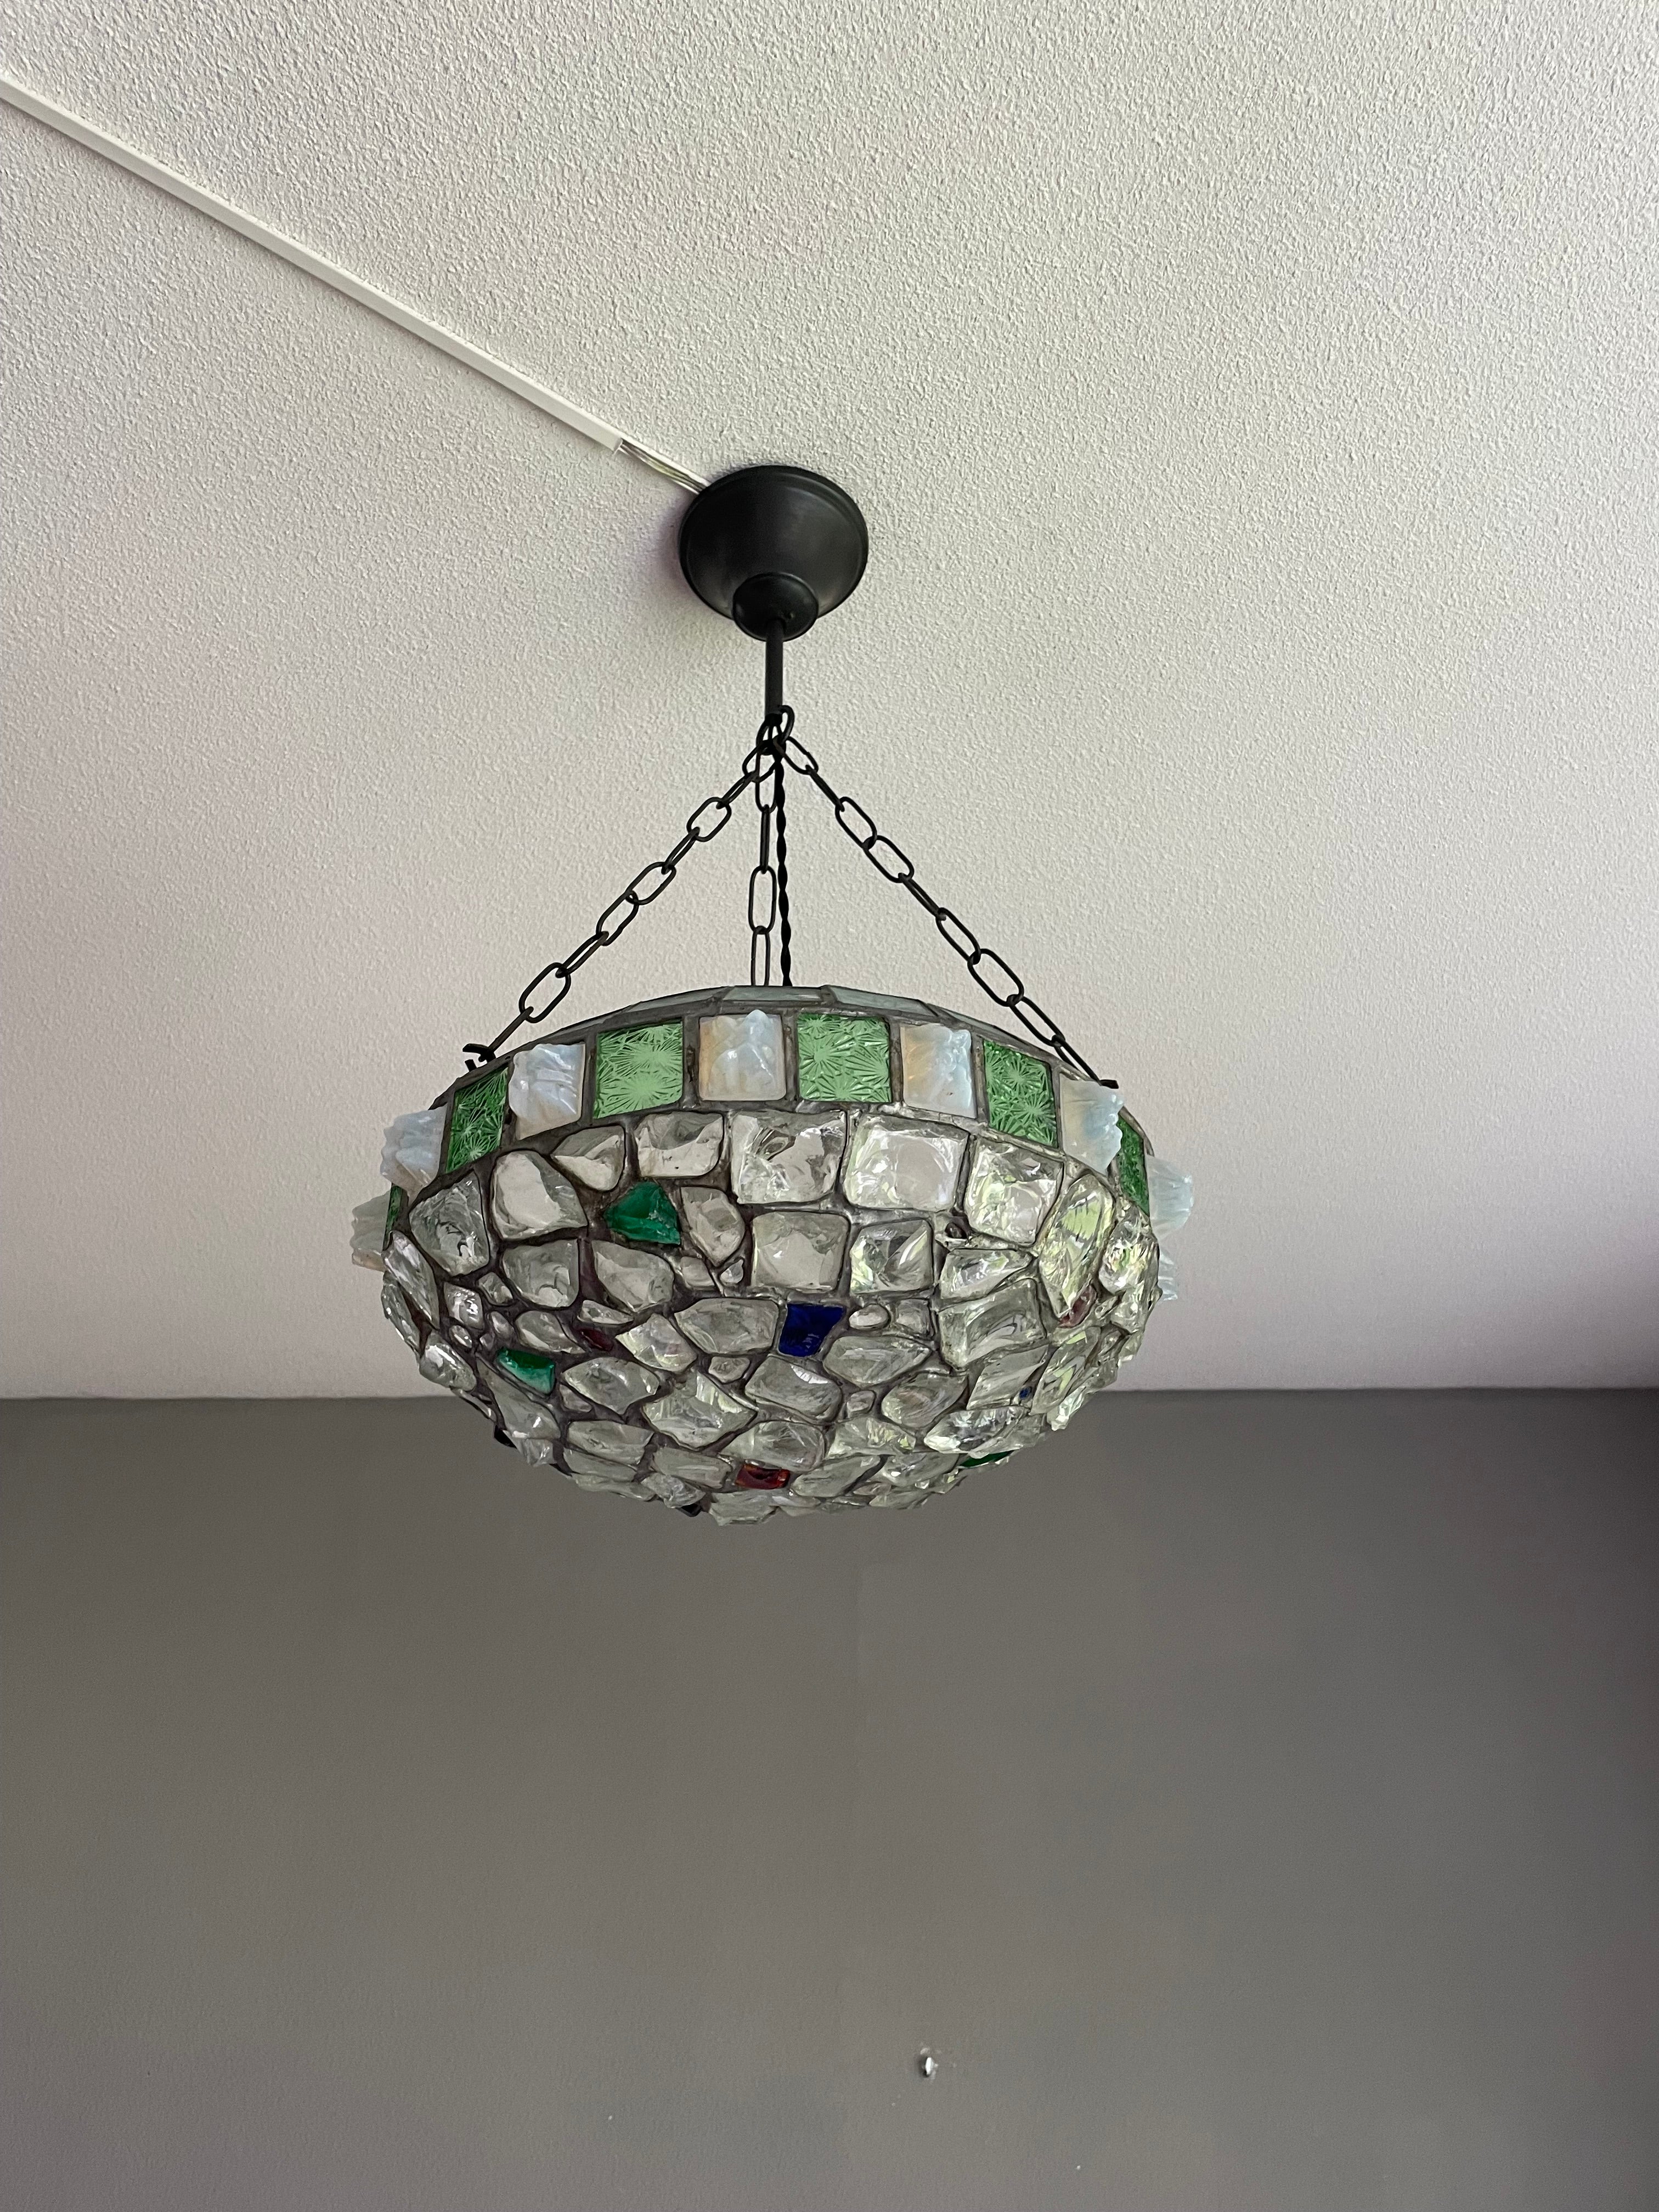 Very cool, inlaid 'chunky glass' light fixture from the early 1900s.

This great looking and intricate workmanship pendant from the earliest years of the 20th century is another one of our recent great finds. With early 20th century lighting being